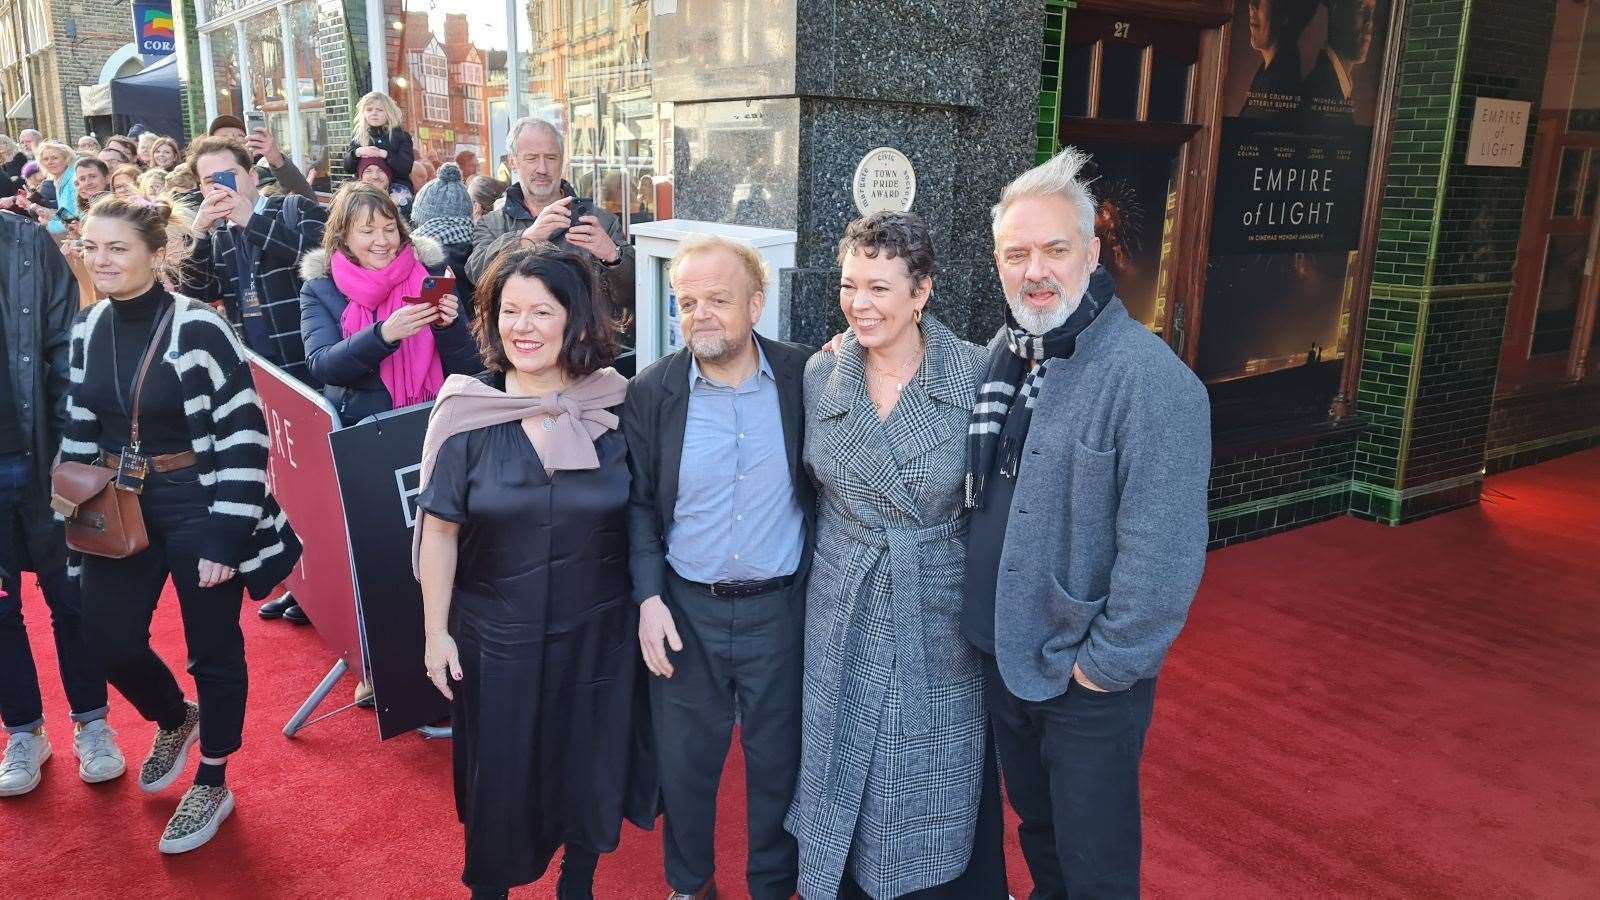 Director Sam Mendes joins the stars of Empire of Light at a special screening in Thanet